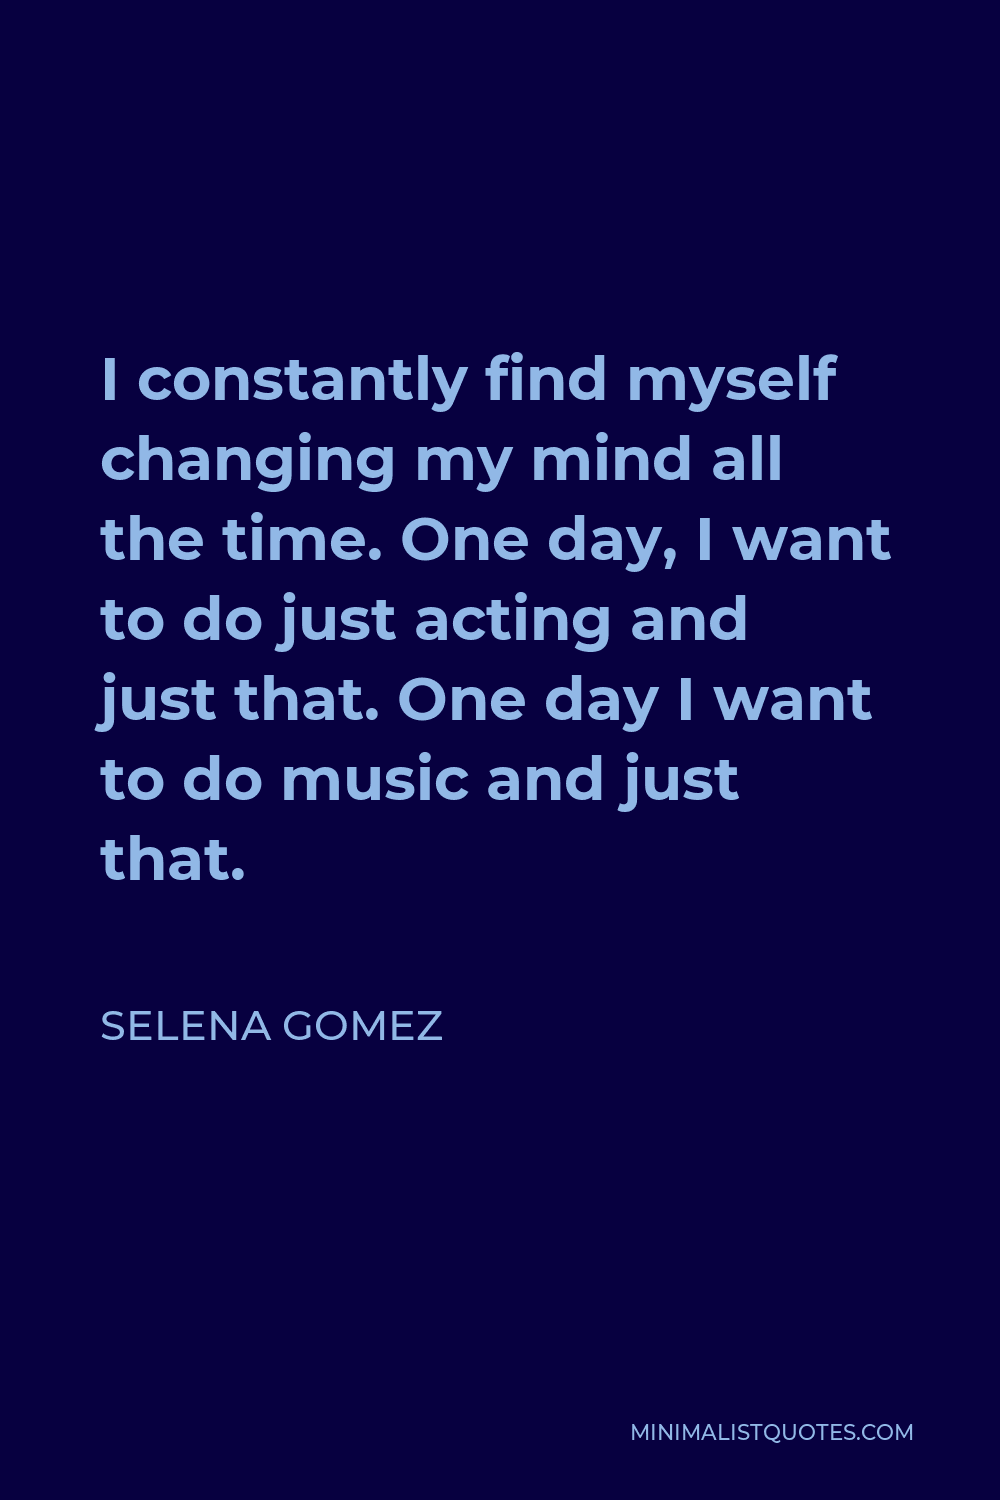 Selena Gomez Quote - I constantly find myself changing my mind all the time. One day, I want to do just acting and just that. One day I want to do music and just that.